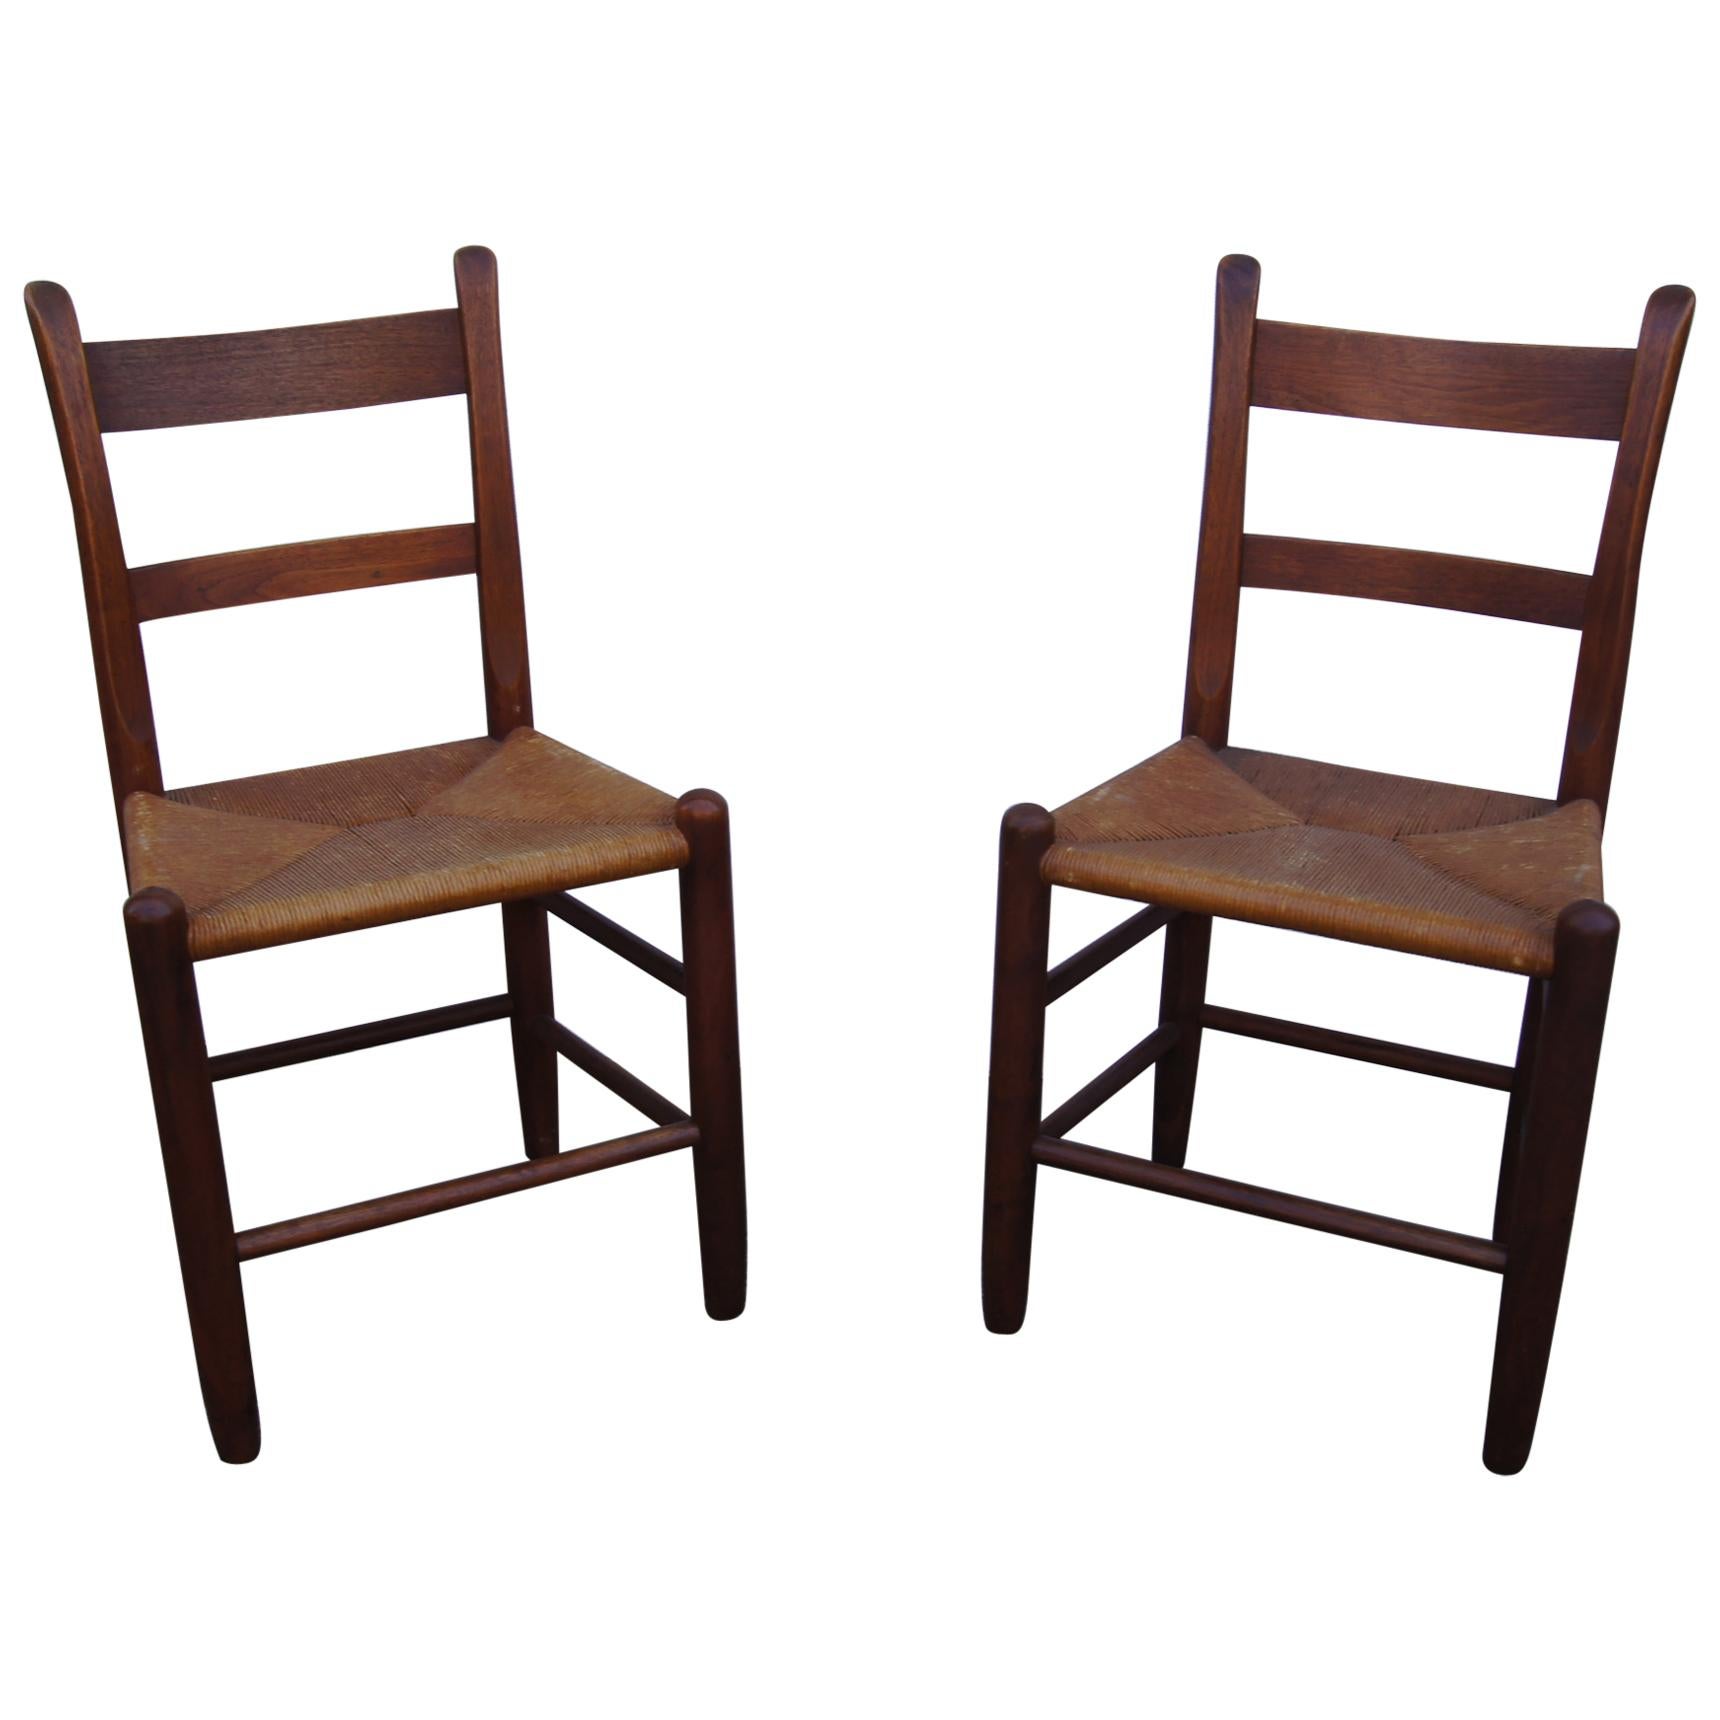 Pair of Teak and Rush Dining Chairs by Charles Webb